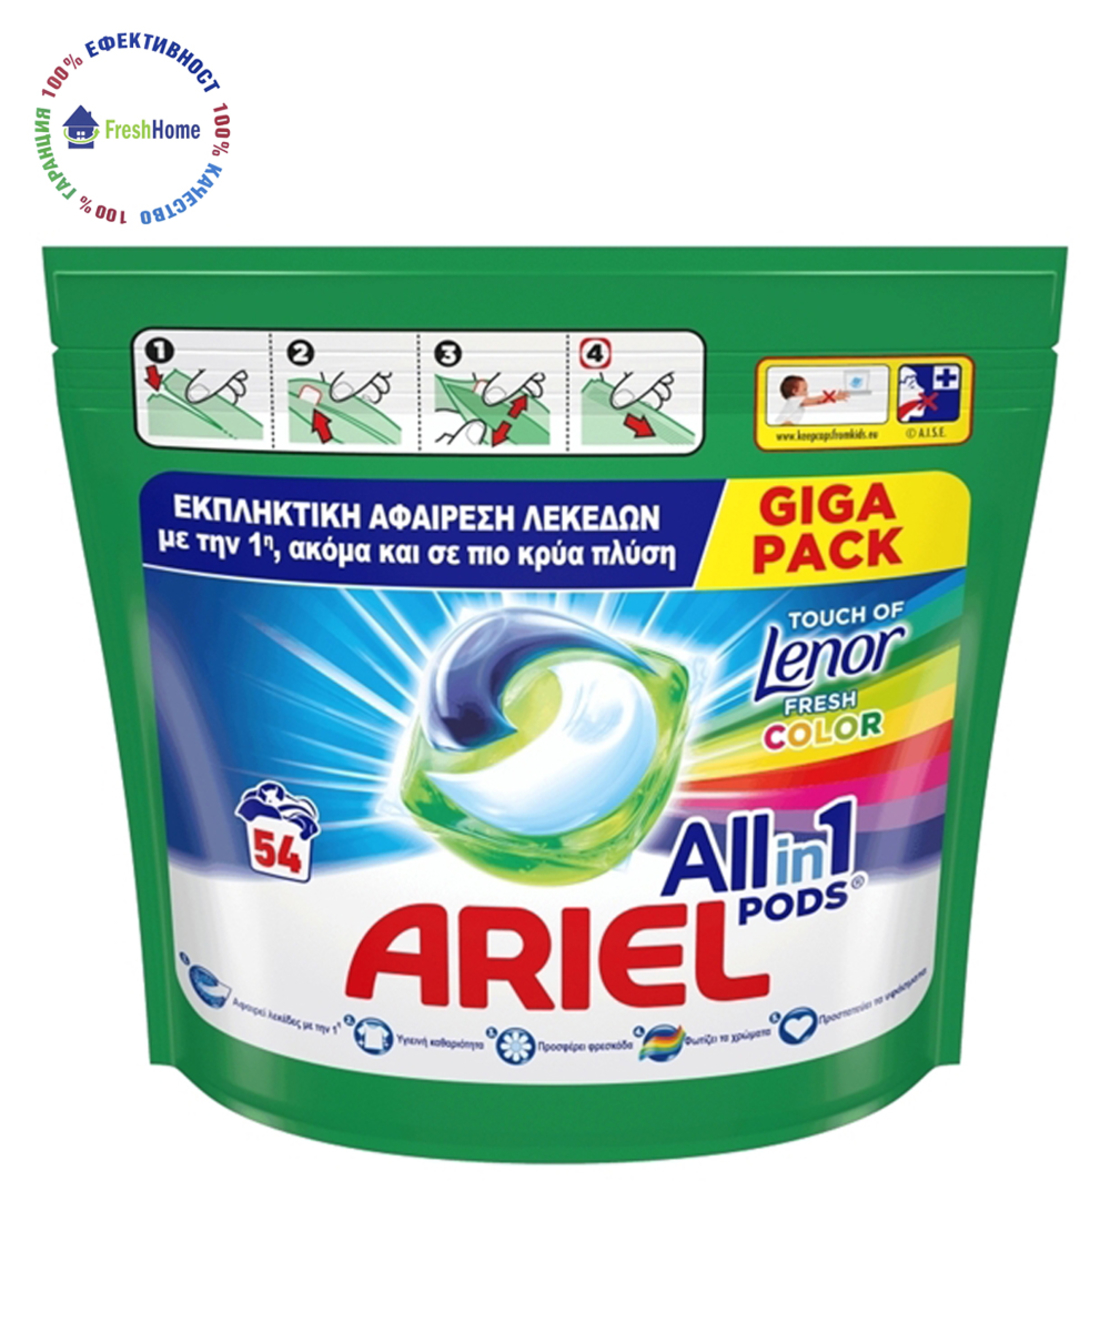 Ariel pods ALLin1 Touch of Lenor Fresh Color 54 капсули за цветно пране